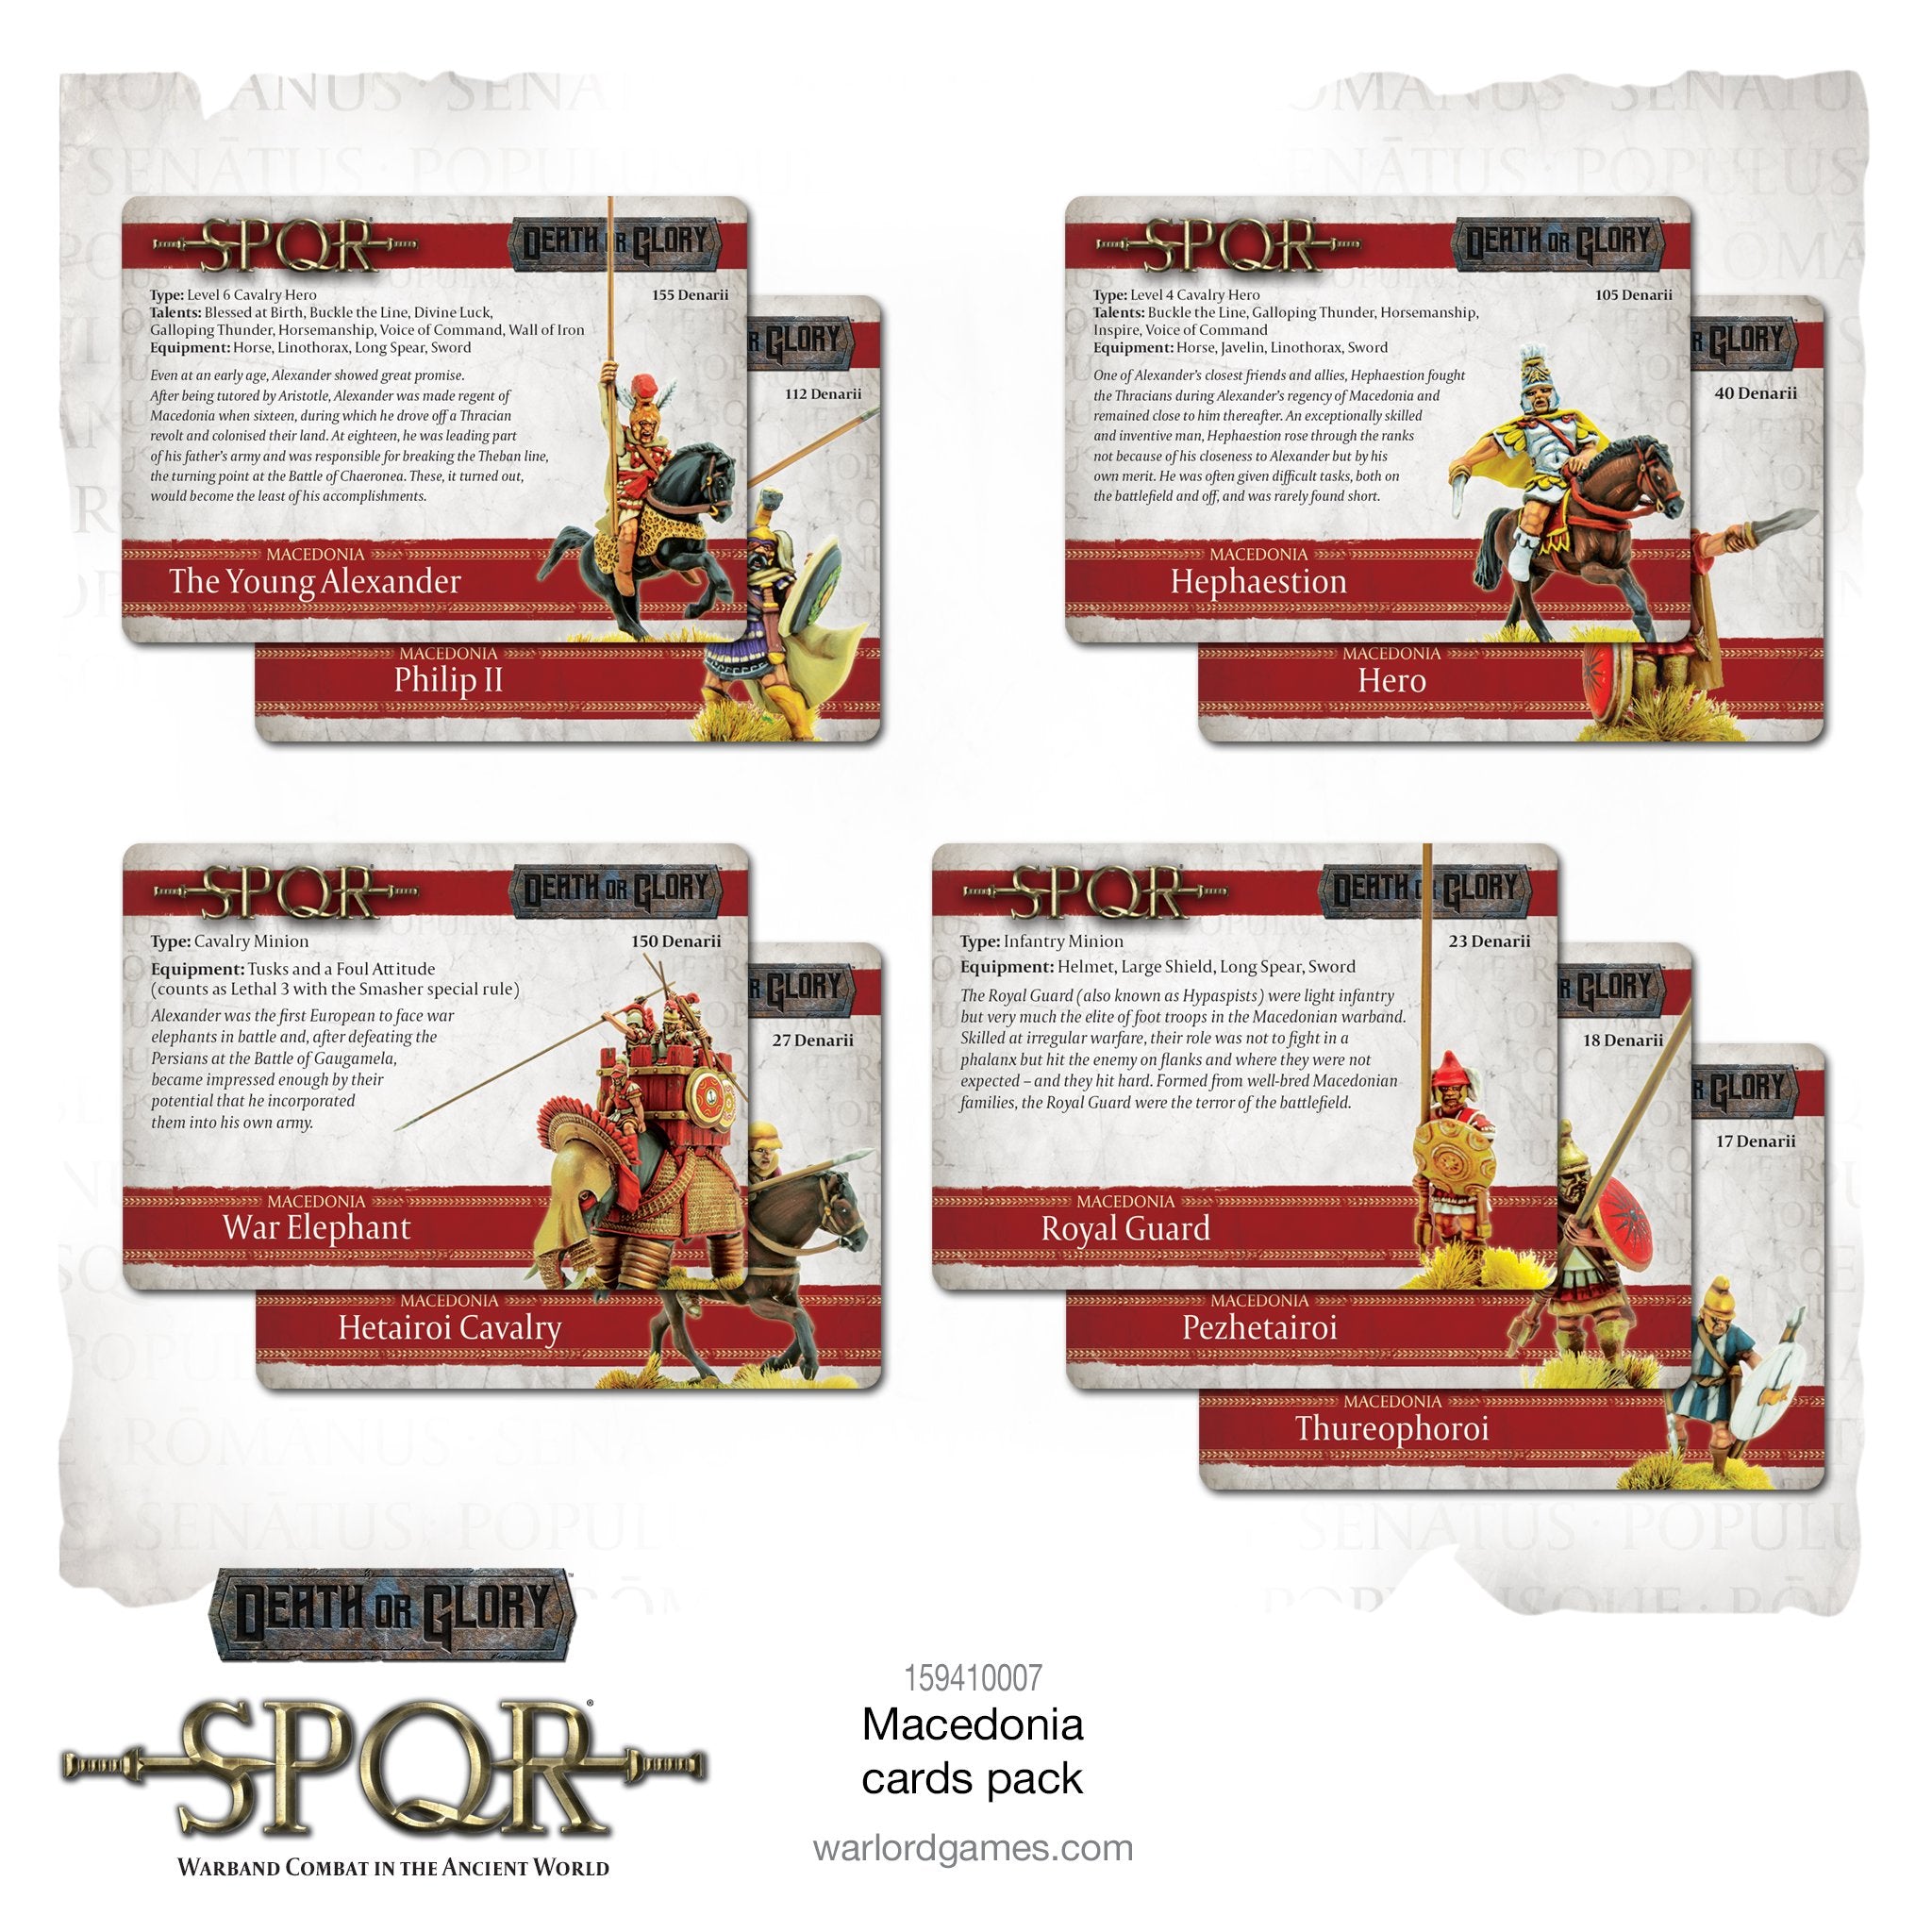 Death or Glory: SPQR Macedonia cards pack